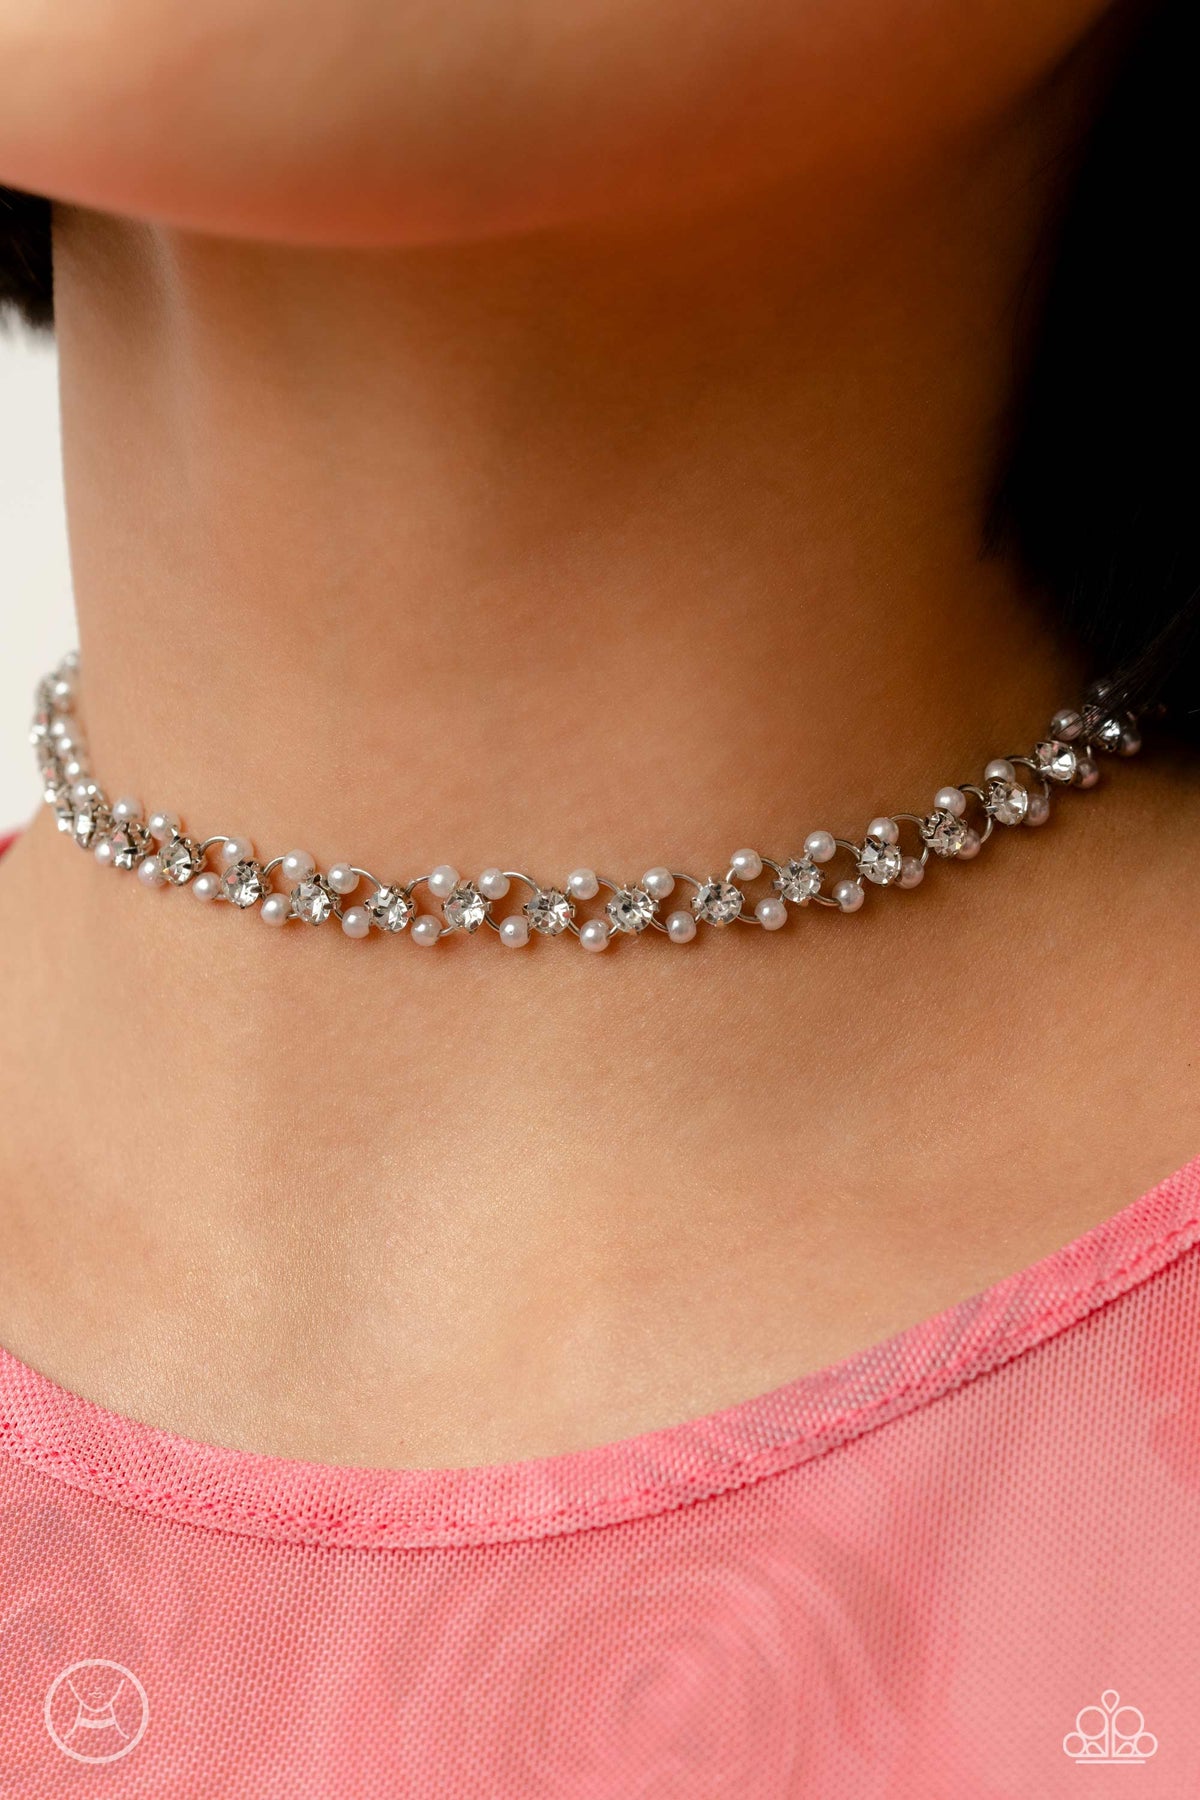 Classy Couture White Pearl Choker Necklace - Paparazzi Accessories-on model - CarasShop.com - $5 Jewelry by Cara Jewels